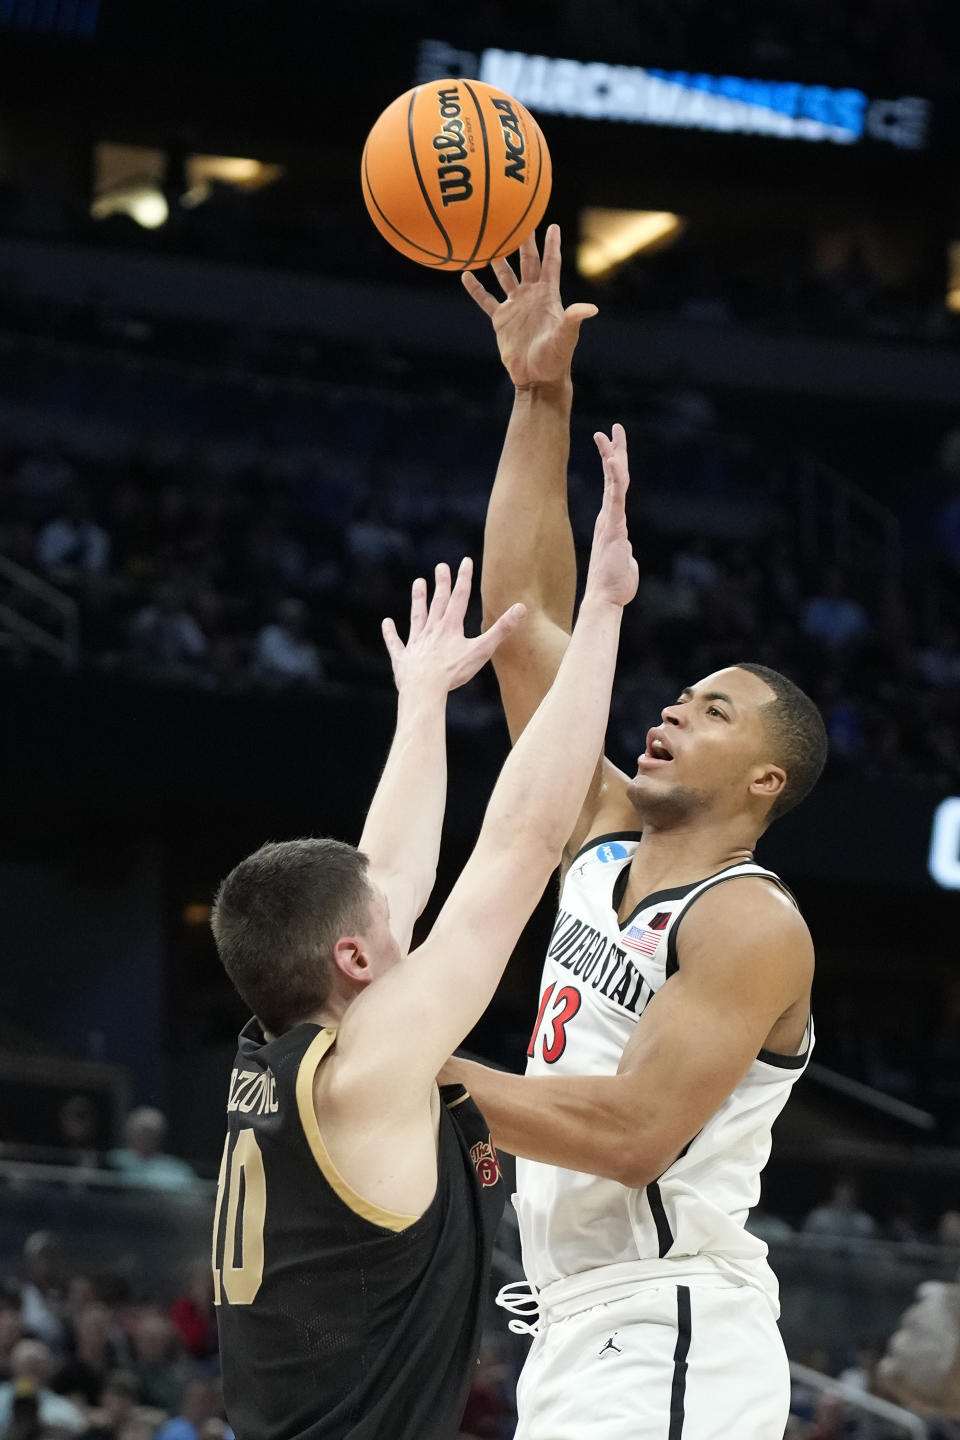 San Diego State forward Jaedon LeDee (13) shoots over Charleston forward Ante Brzovic (10) during the first half of a first-round college basketball game in the NCAA Tournament Thursday, March 16, 2023, in Orlando, Fla. (AP Photo/Chris O'Meara)